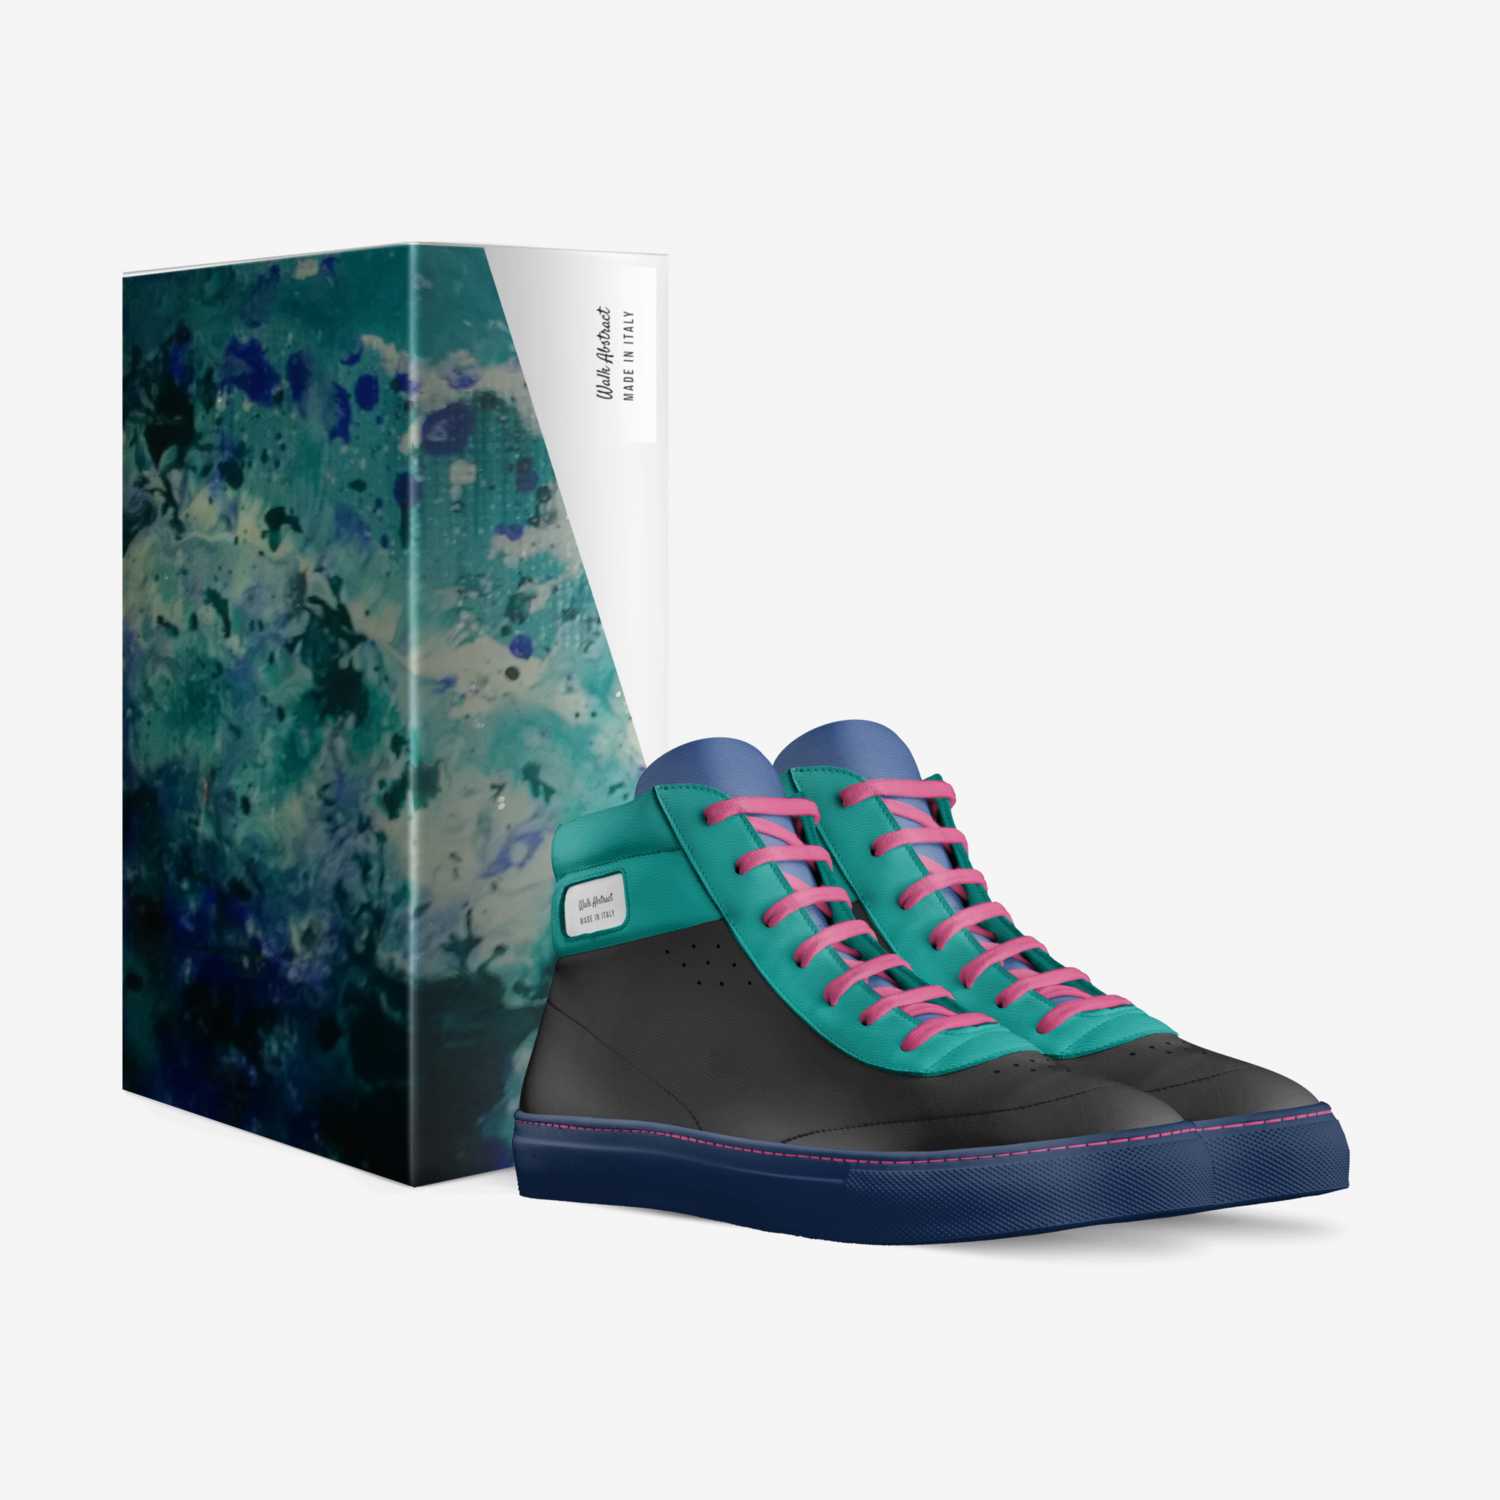 Walk Abstract custom made in Italy shoes by Daniel Lutz | Box view